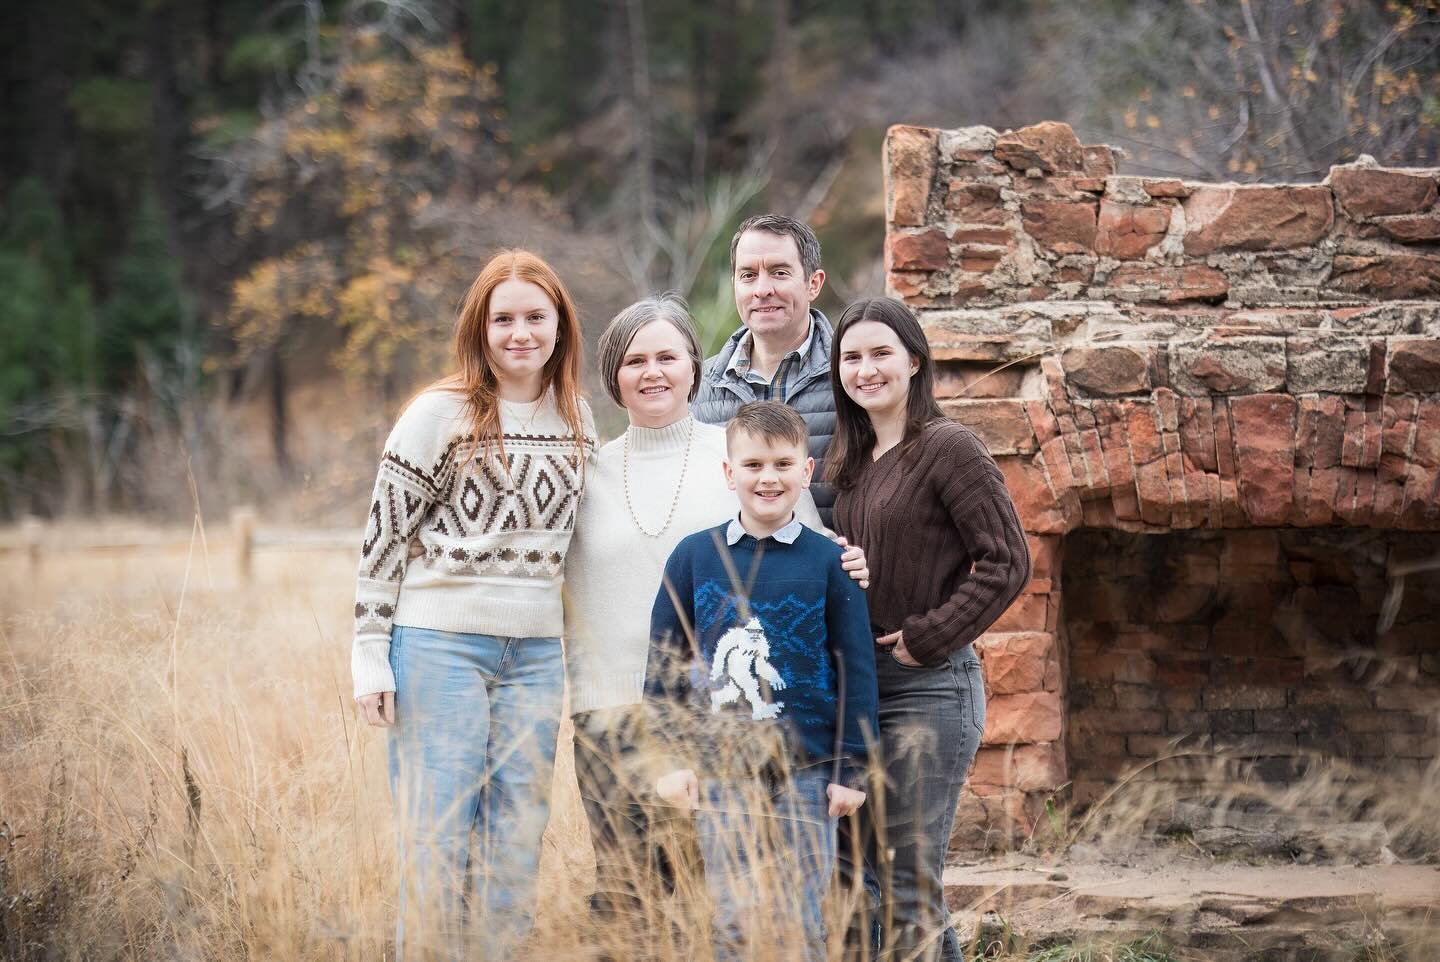 Had to share a few more from this sweet family and high school senior photo session back in the fall. Happy Graduation!